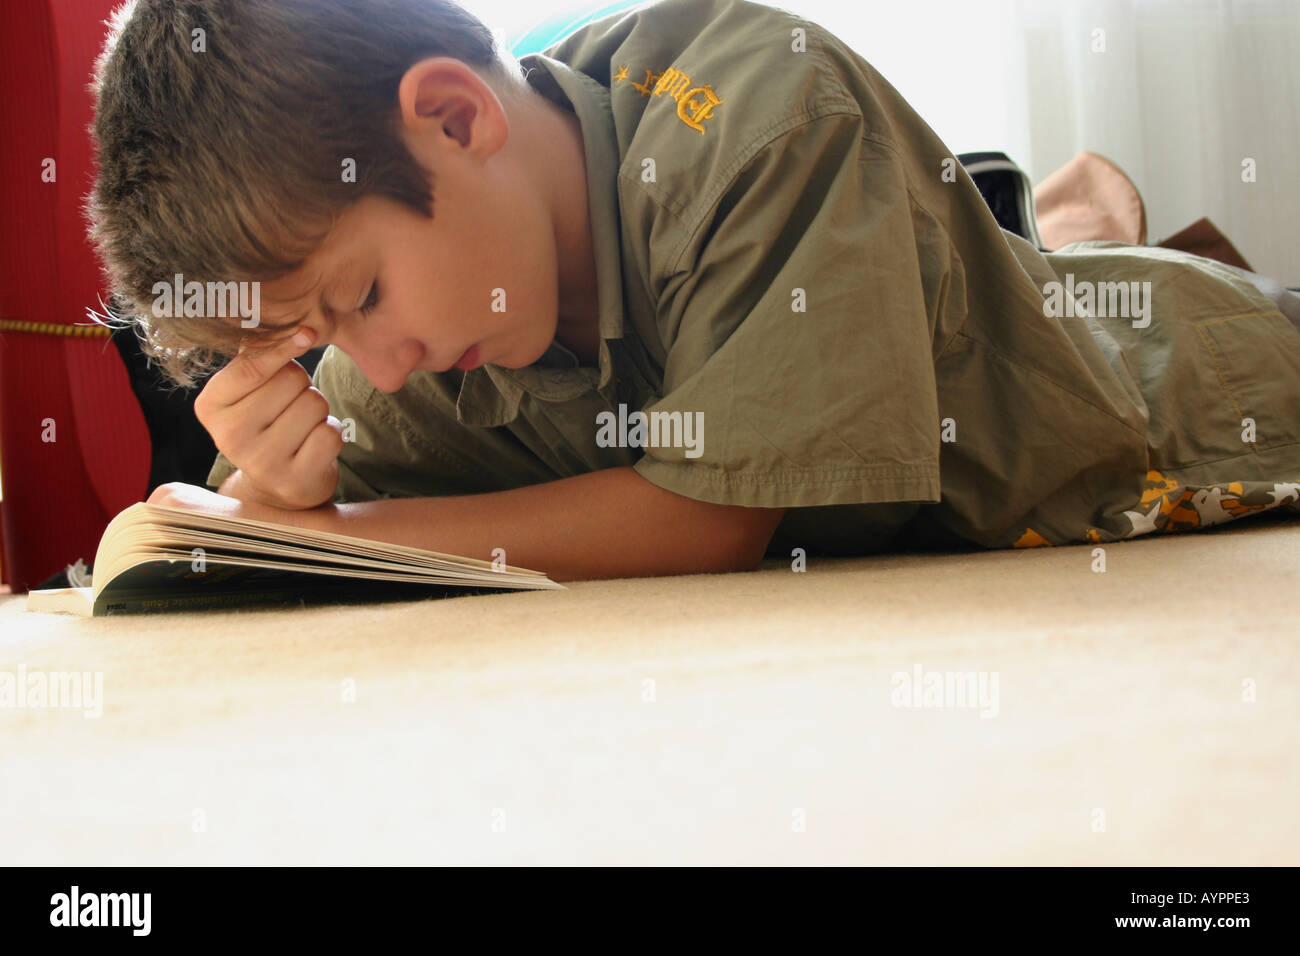 A young boy attentively reading his book Stock Photo